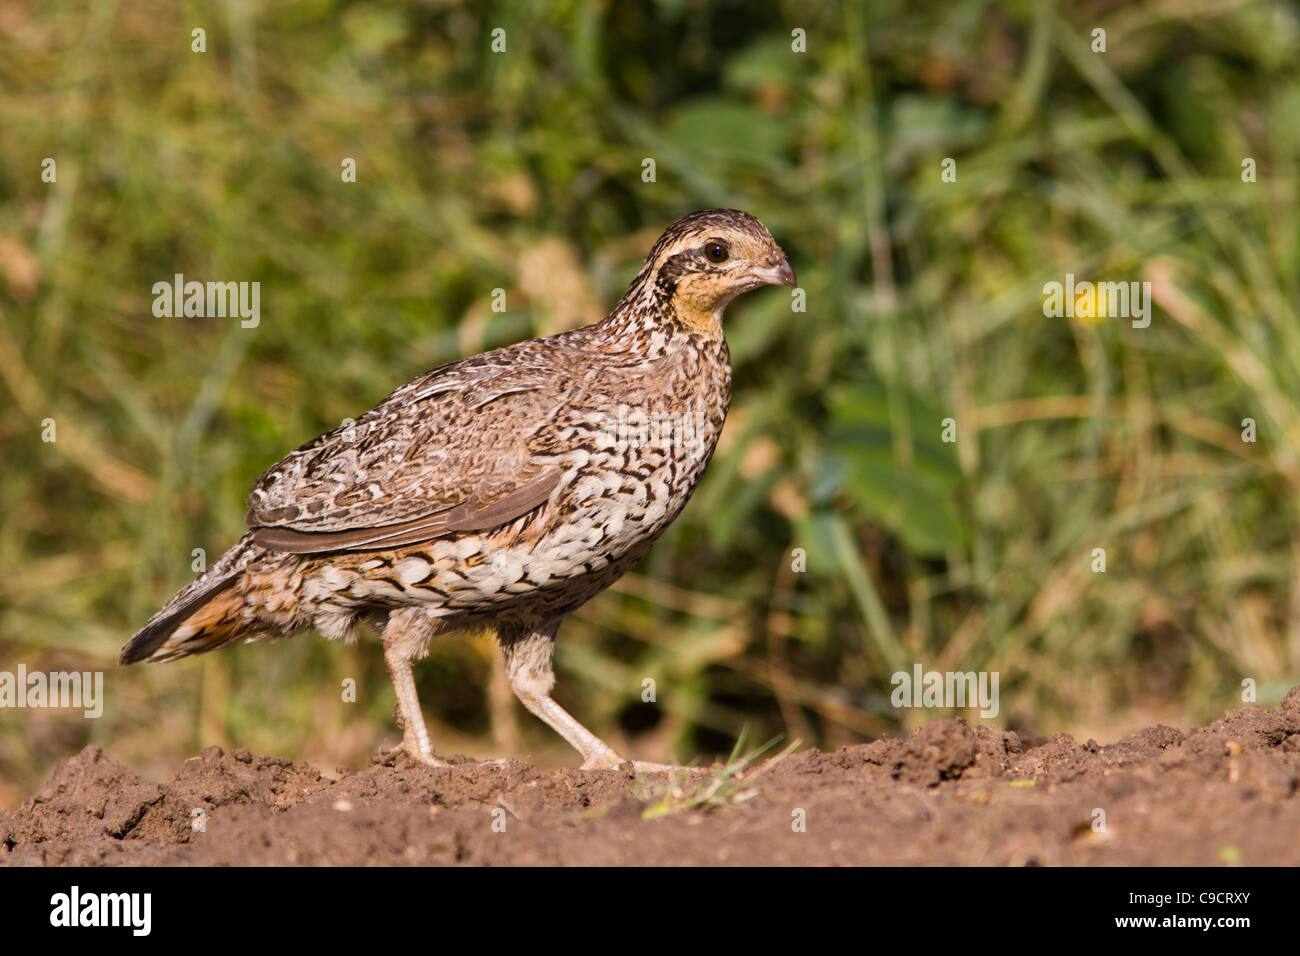 Female Northern Bobwhite, bobwhite quail (Colinus virginianus) which received its name from a distinct, whistled 'bobwhite' call, in South Texas. Stock Photo